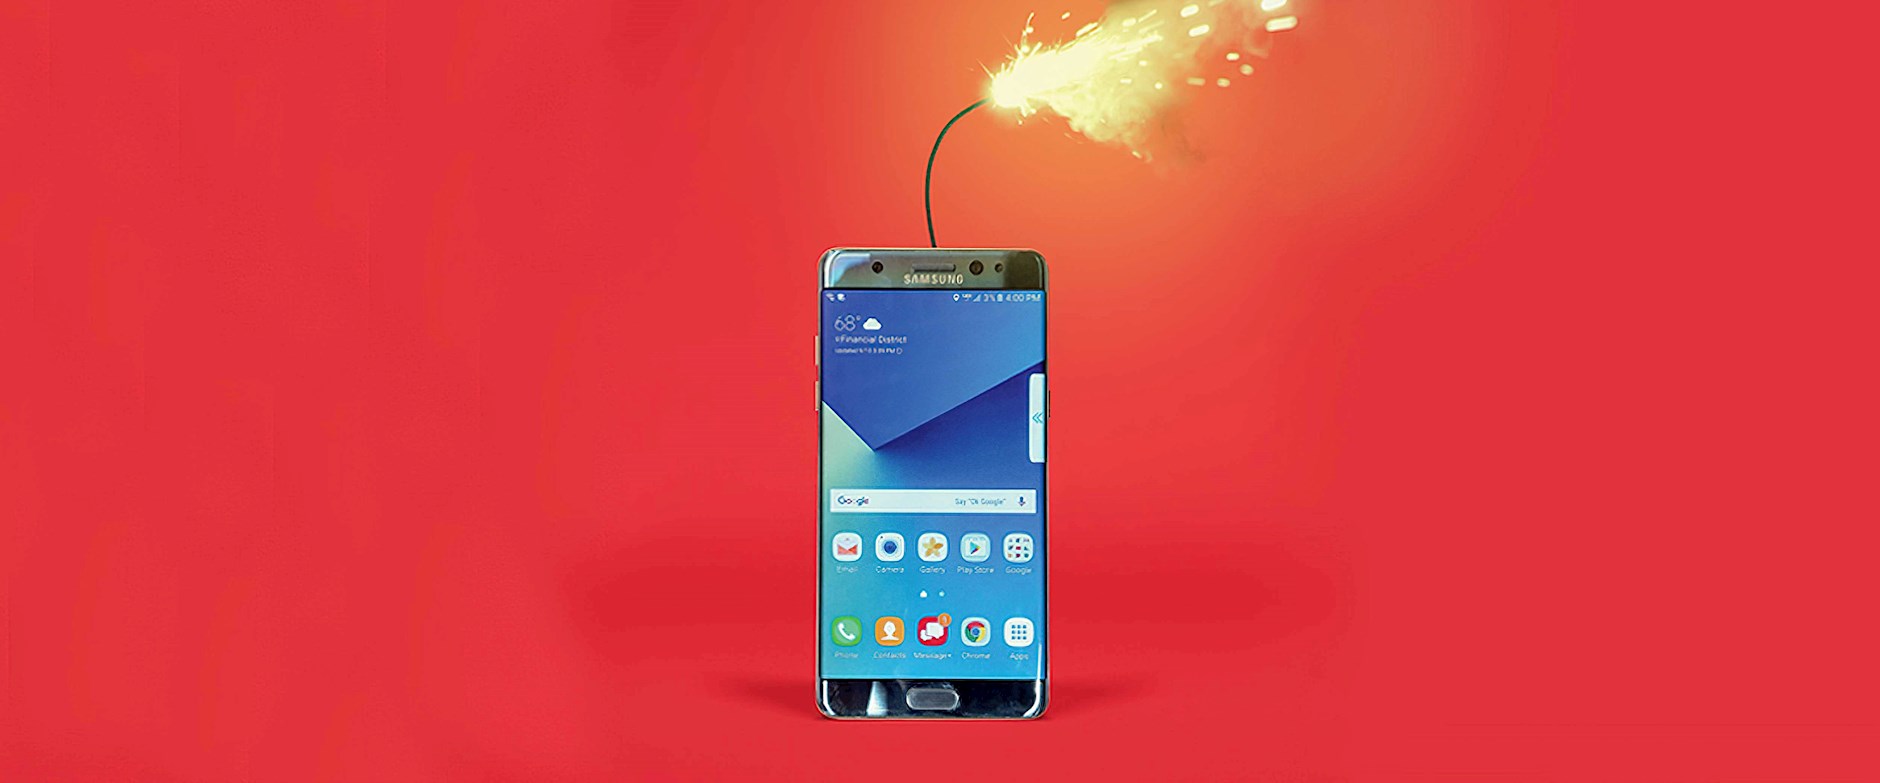 Samsung phone with a lit fuse